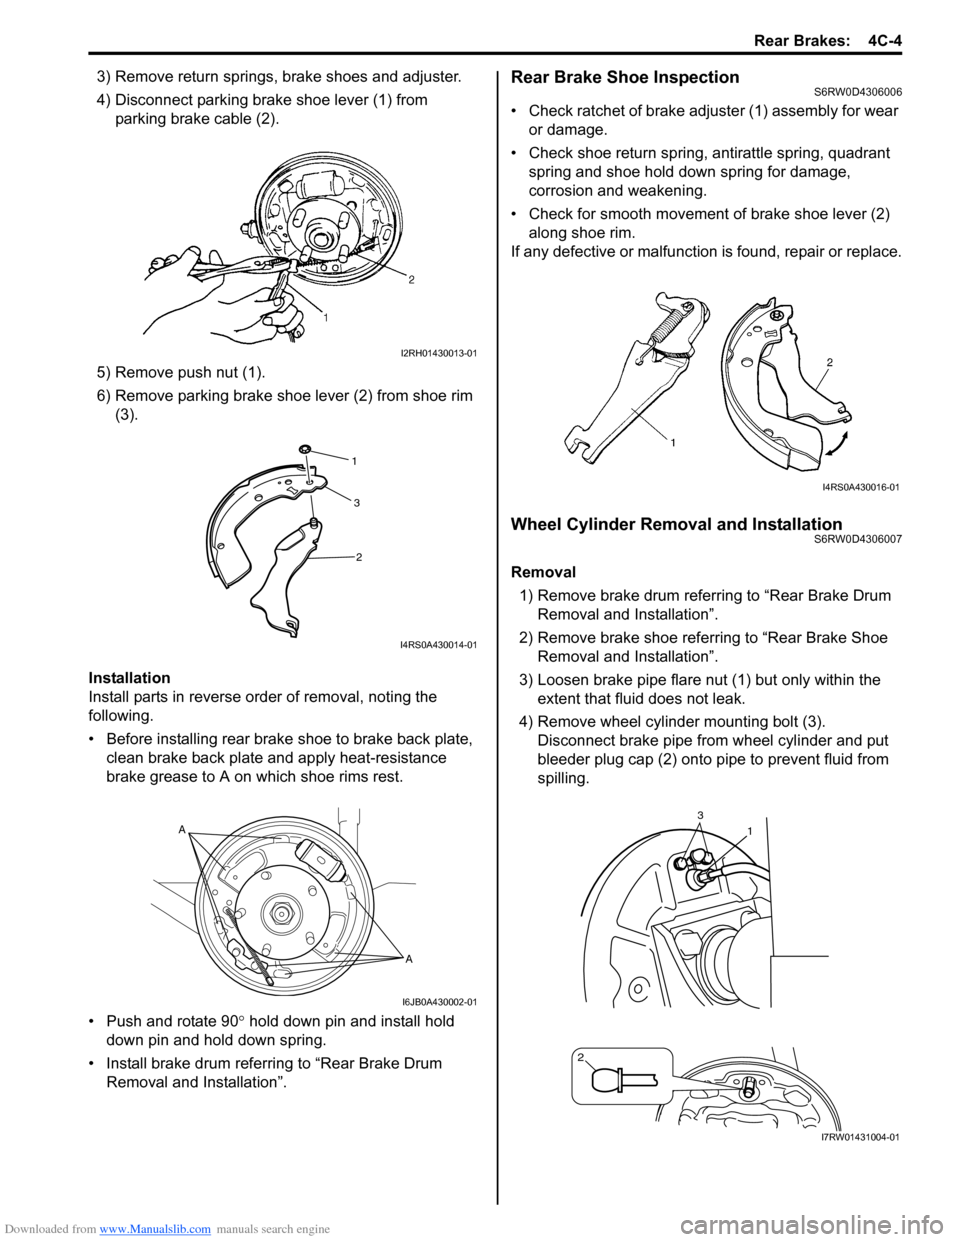 SUZUKI SX4 2006 1.G Service Owners Manual Downloaded from www.Manualslib.com manuals search engine Rear Brakes:  4C-4
3) Remove return springs, brake shoes and adjuster.
4) Disconnect parking brake shoe lever (1) from 
parking brake cable (2)